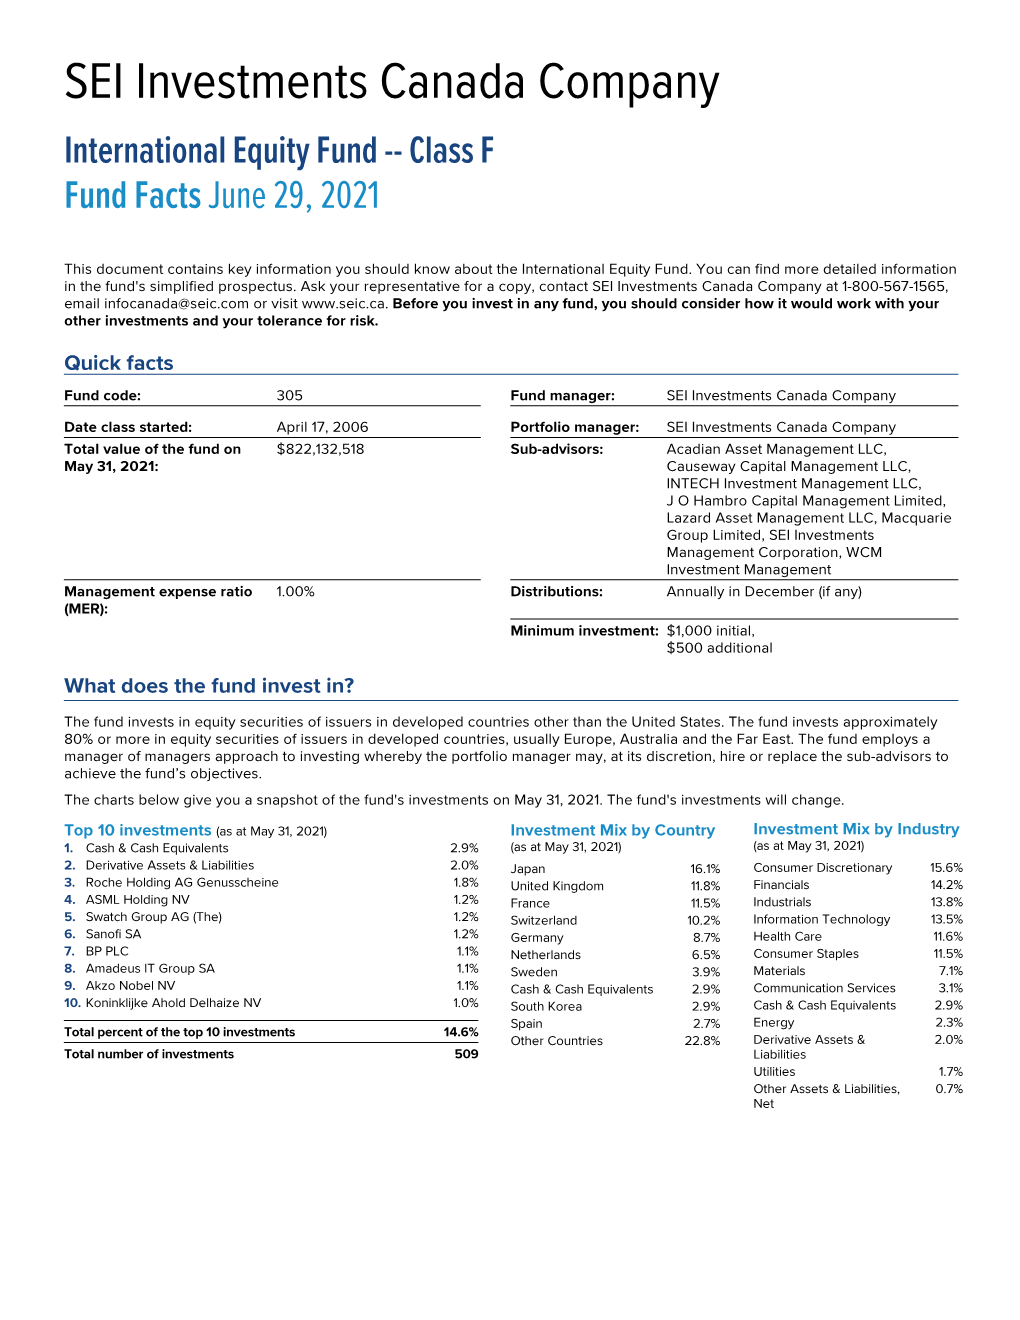 International Equity Fund -- Class F Fund Facts June 29, 2021